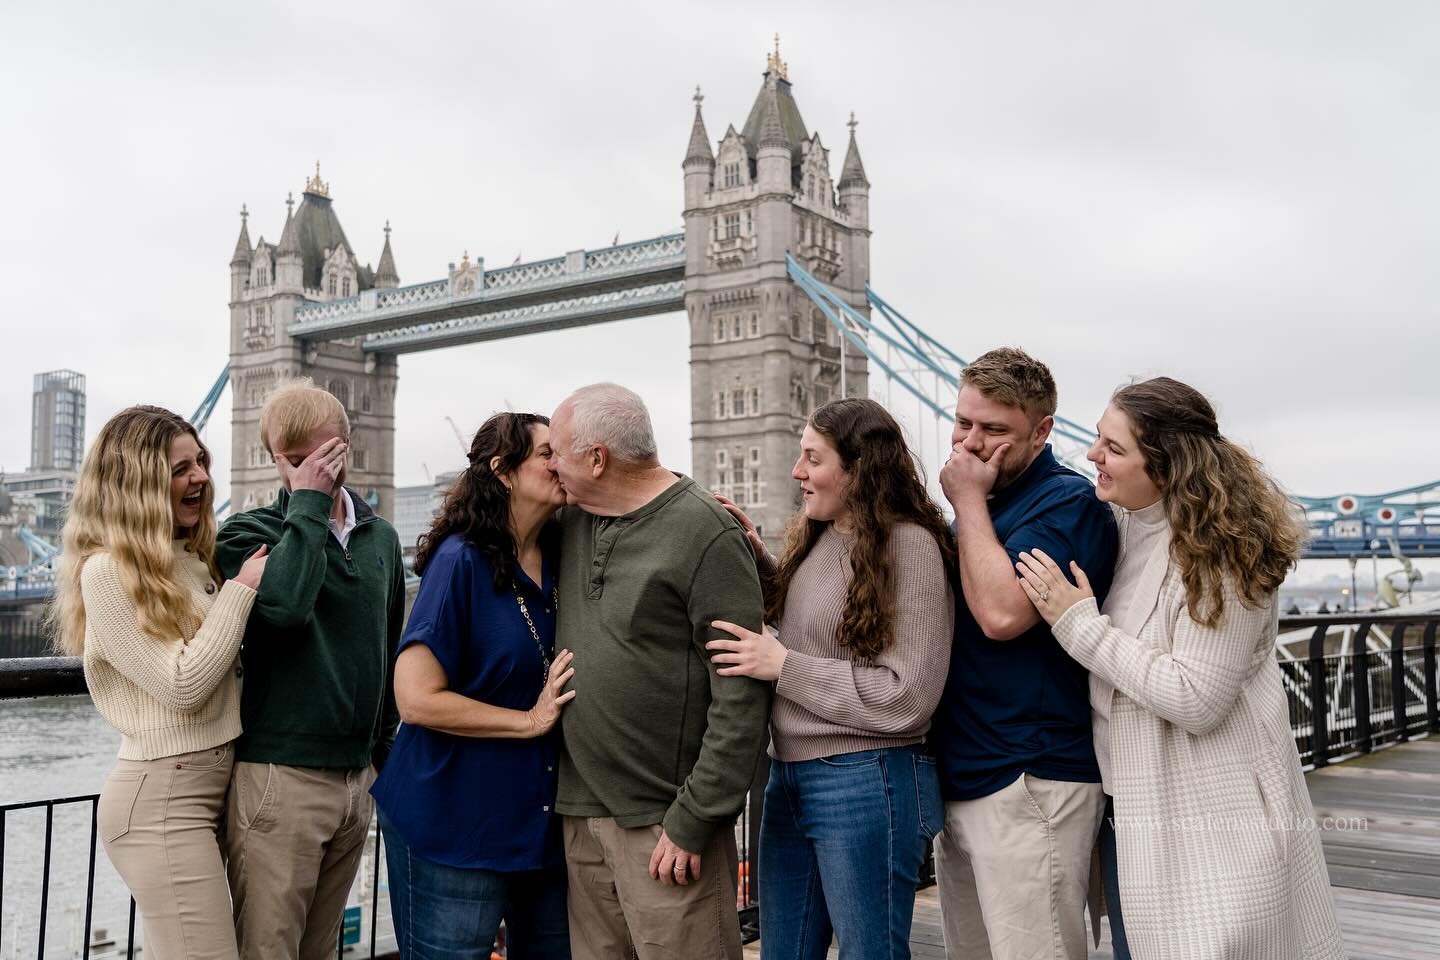 Family photoshoot in London 👇

and wondering how long our family photoshoots in London last? 🤔 Usually run from 1 to 1.5 hours!

That&rsquo;s ample time to stroll through London&rsquo;s picturesque streets, strike a pose against its iconic landmark